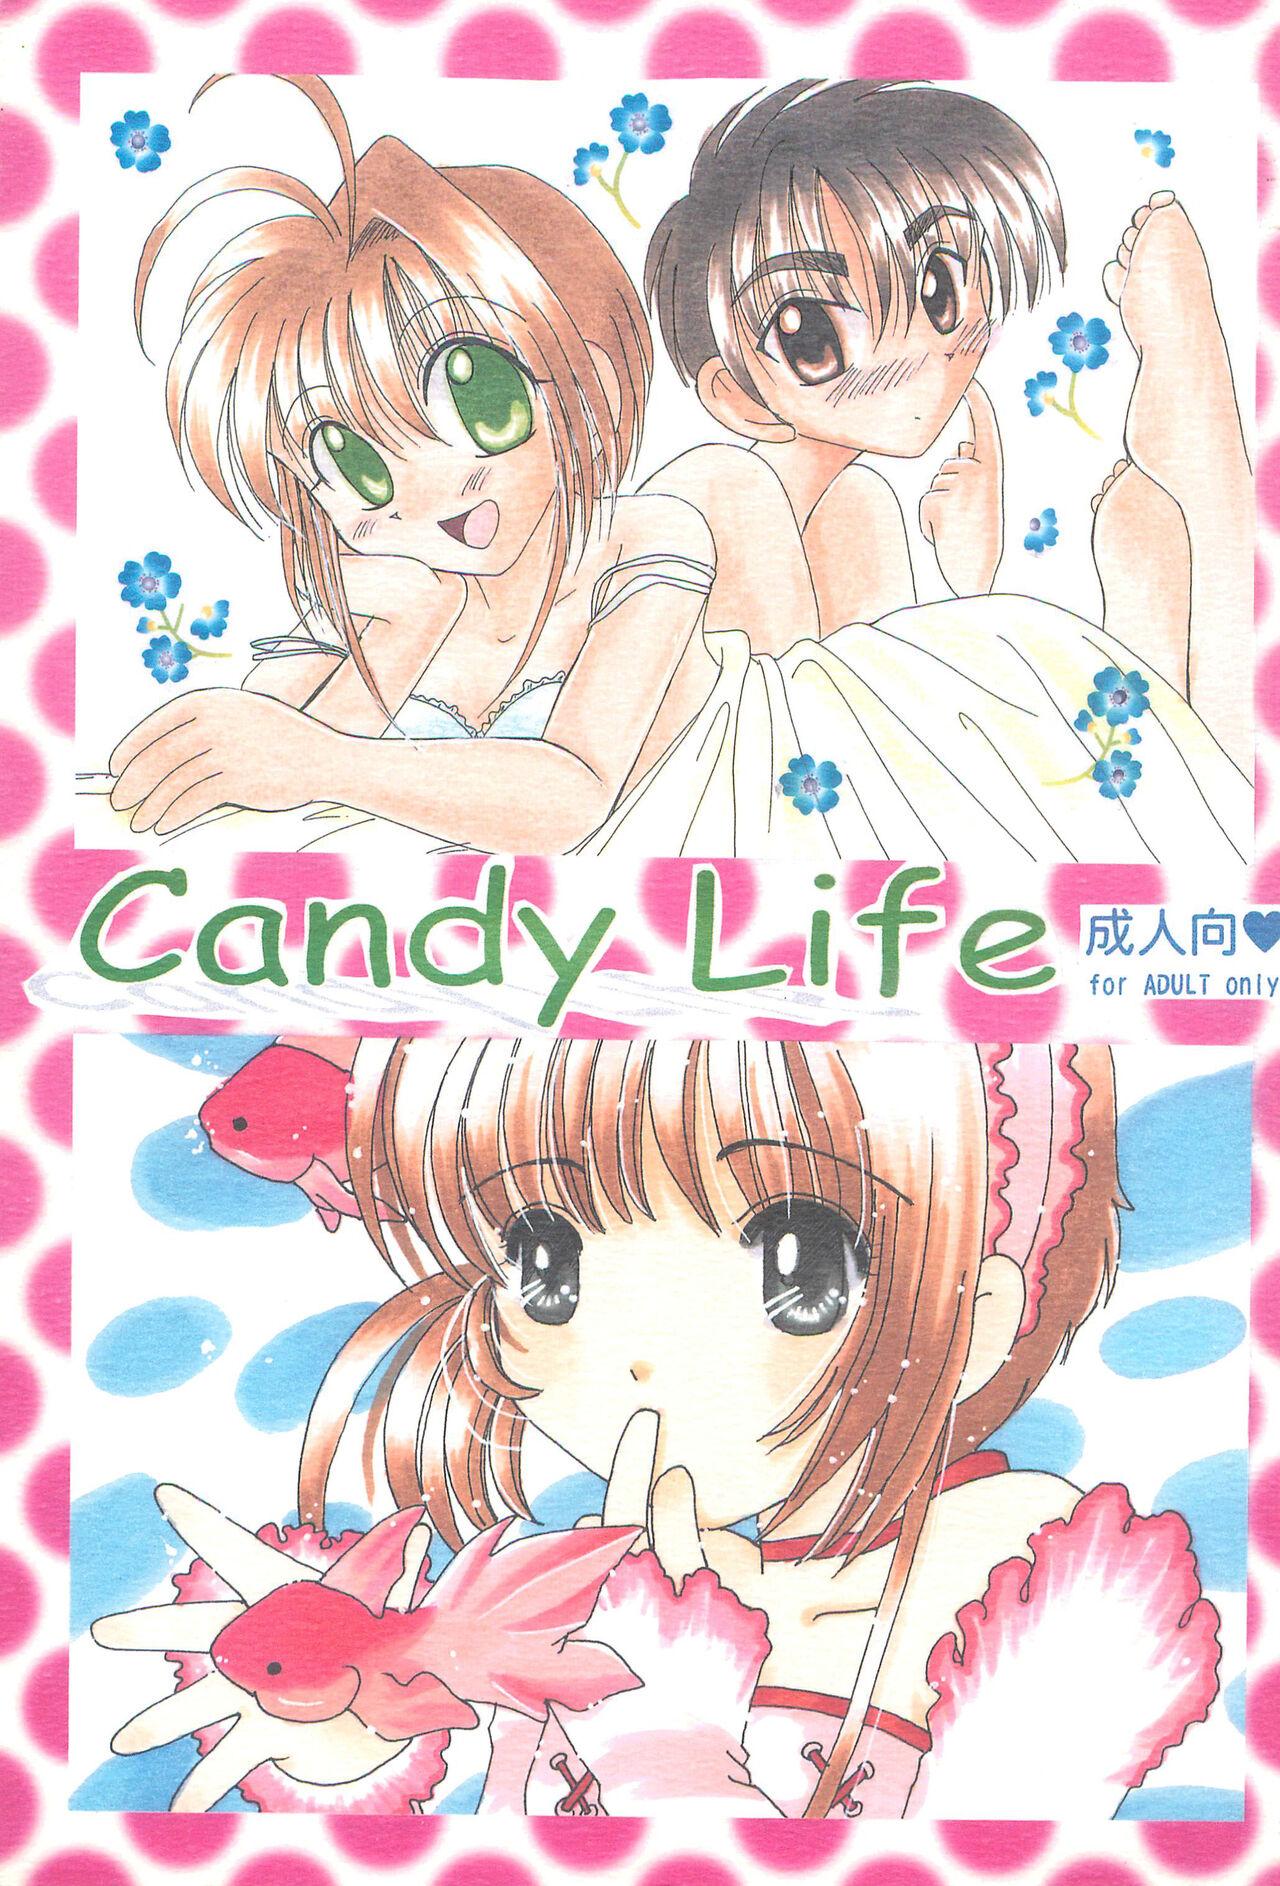 Pete Candy Life - Cardcaptor sakura Roleplay - Picture 1